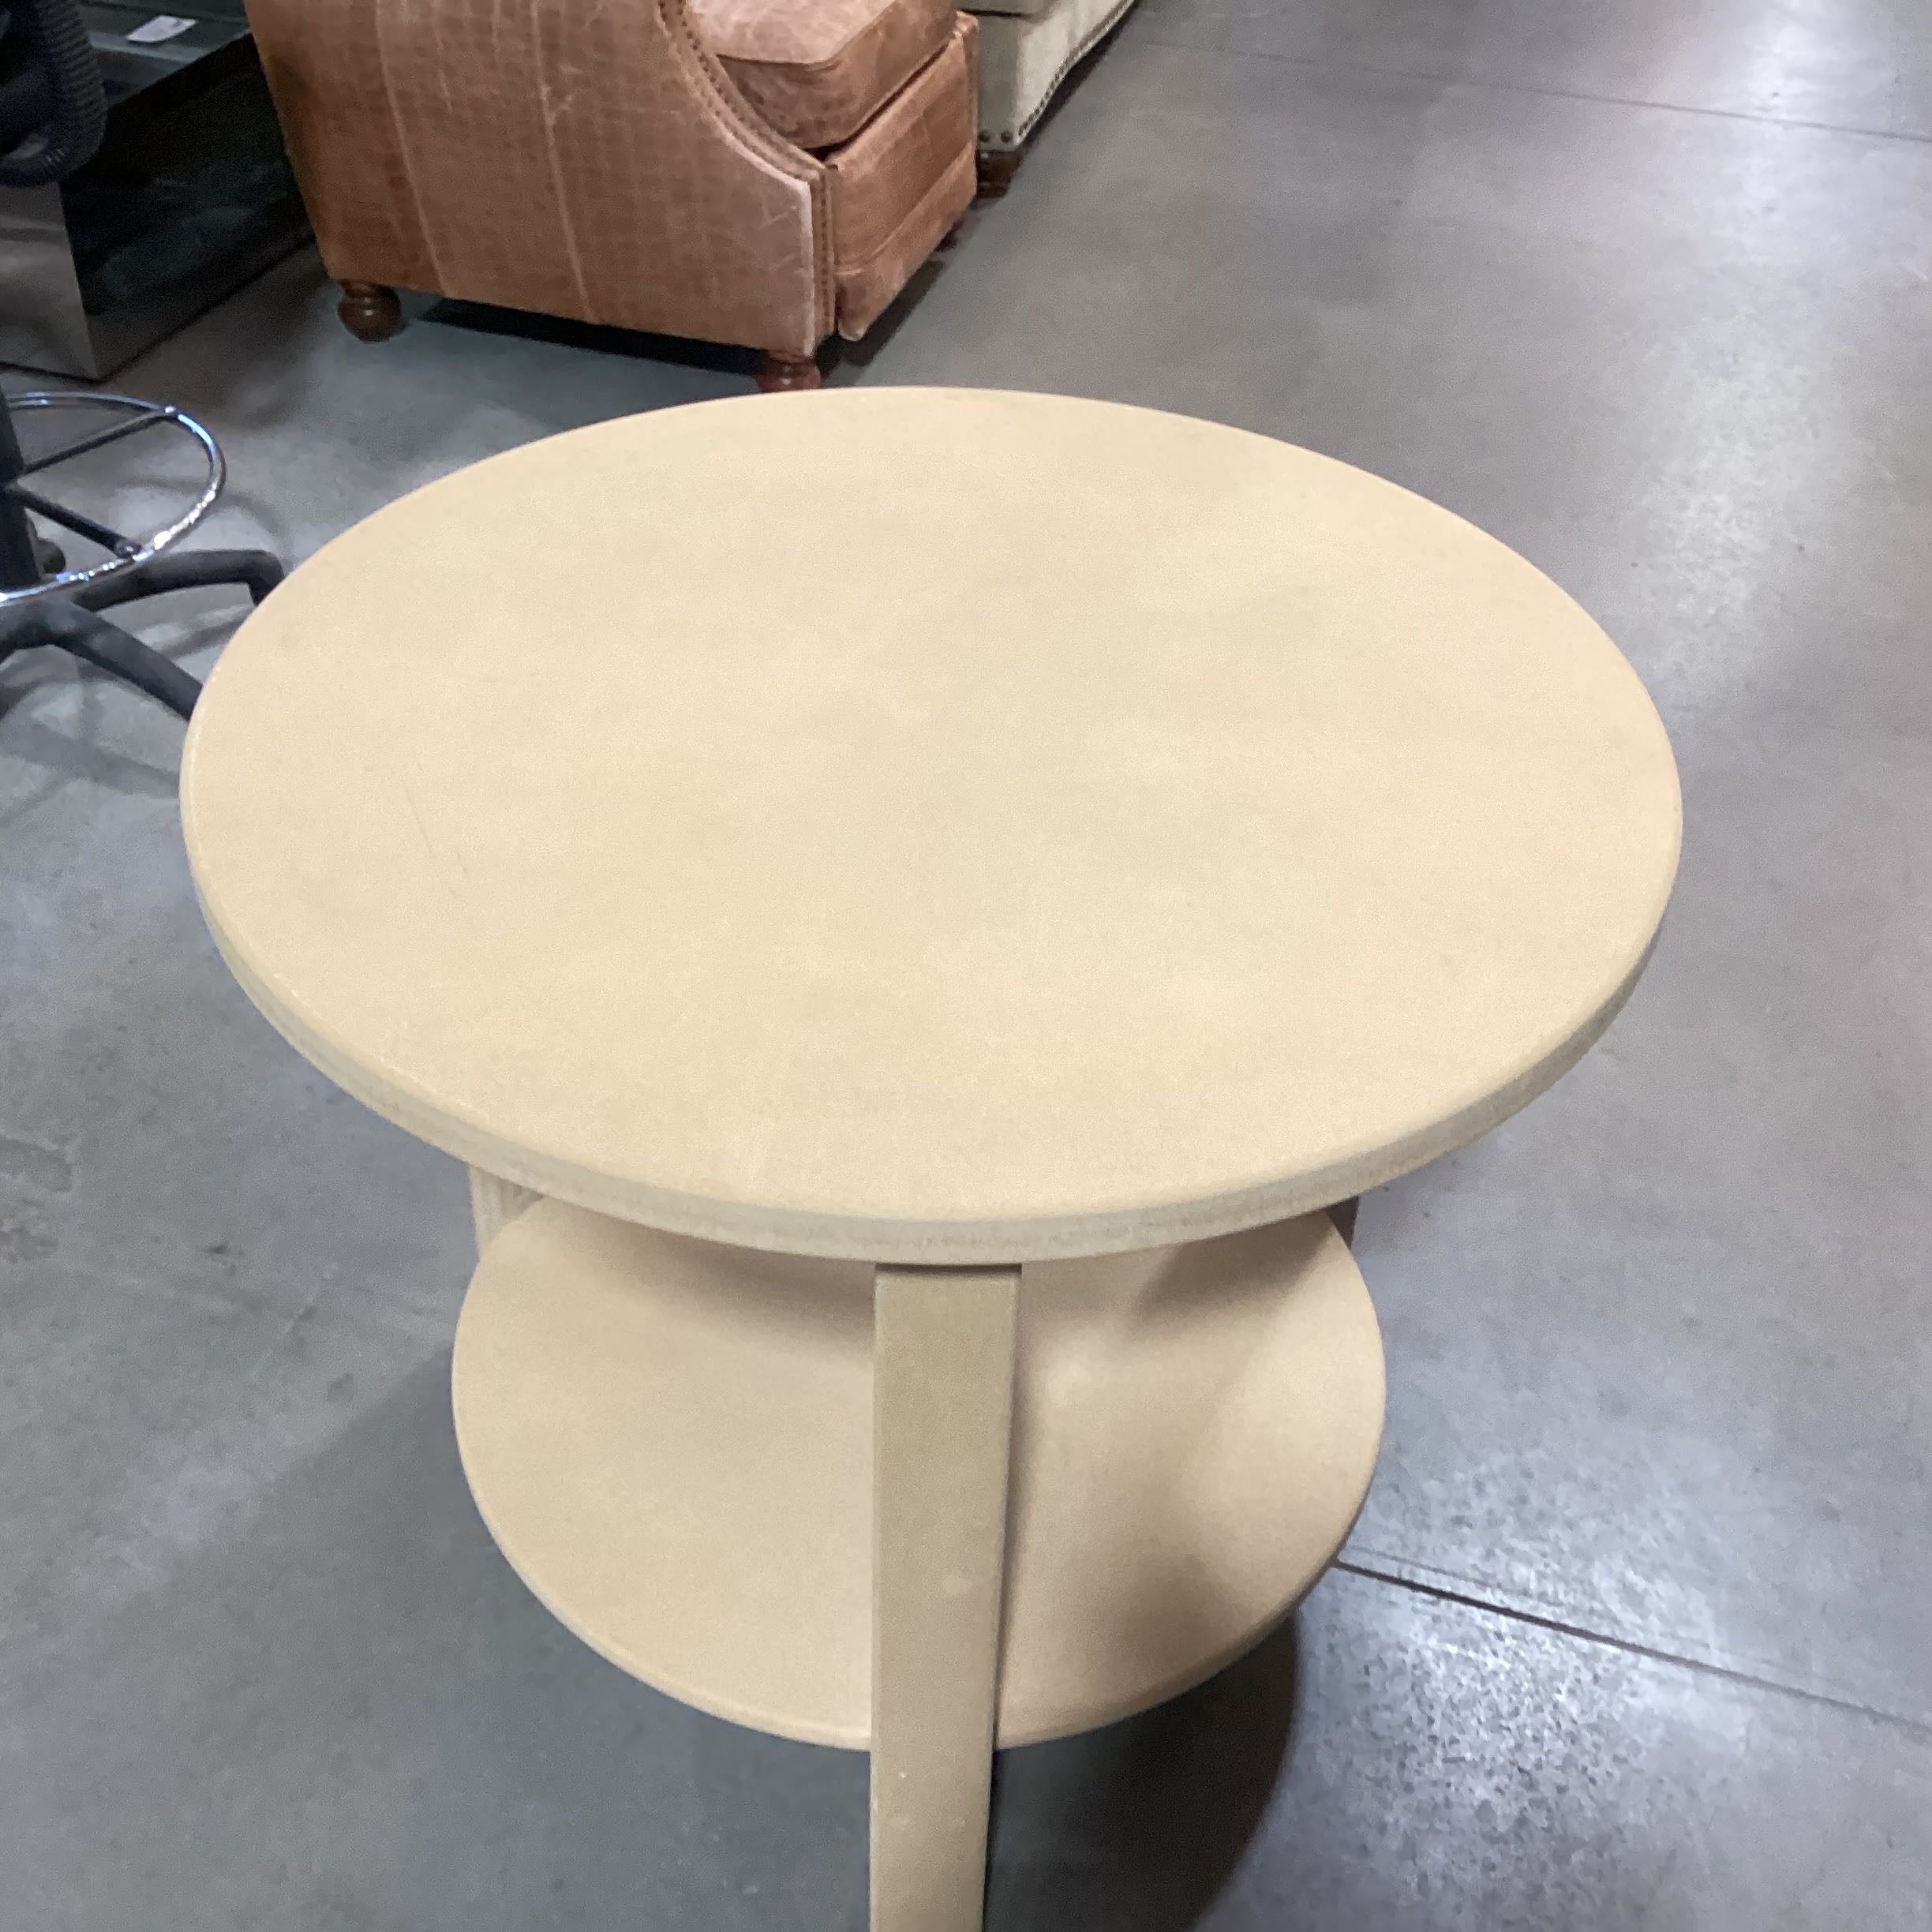 2 Tiered Composite Wood Unfinished Accent Table